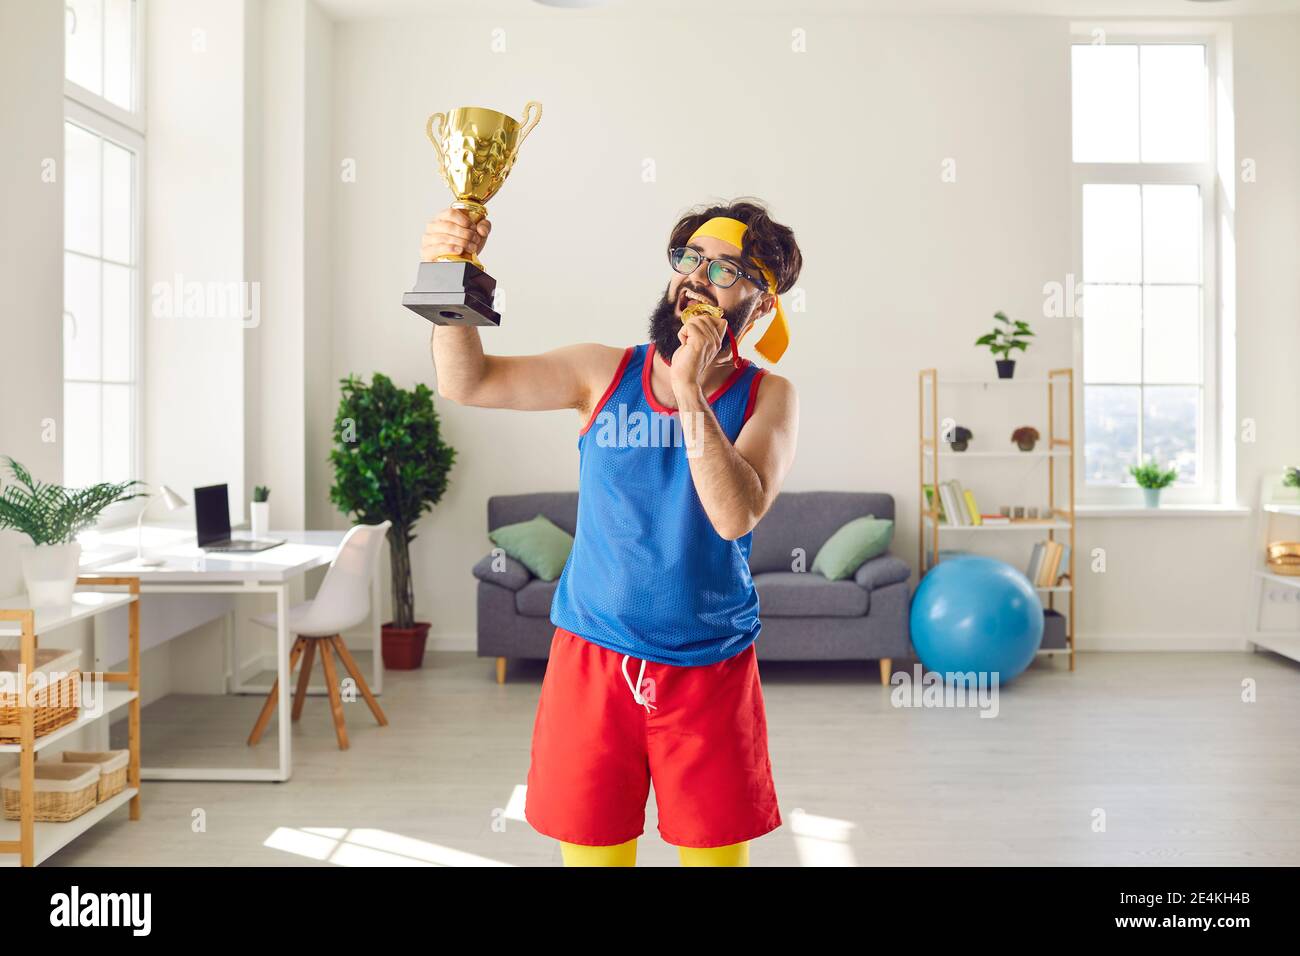 Crazy, goofy, funny, proud sport contest winner showing off his gold cup and medal Stock Photo